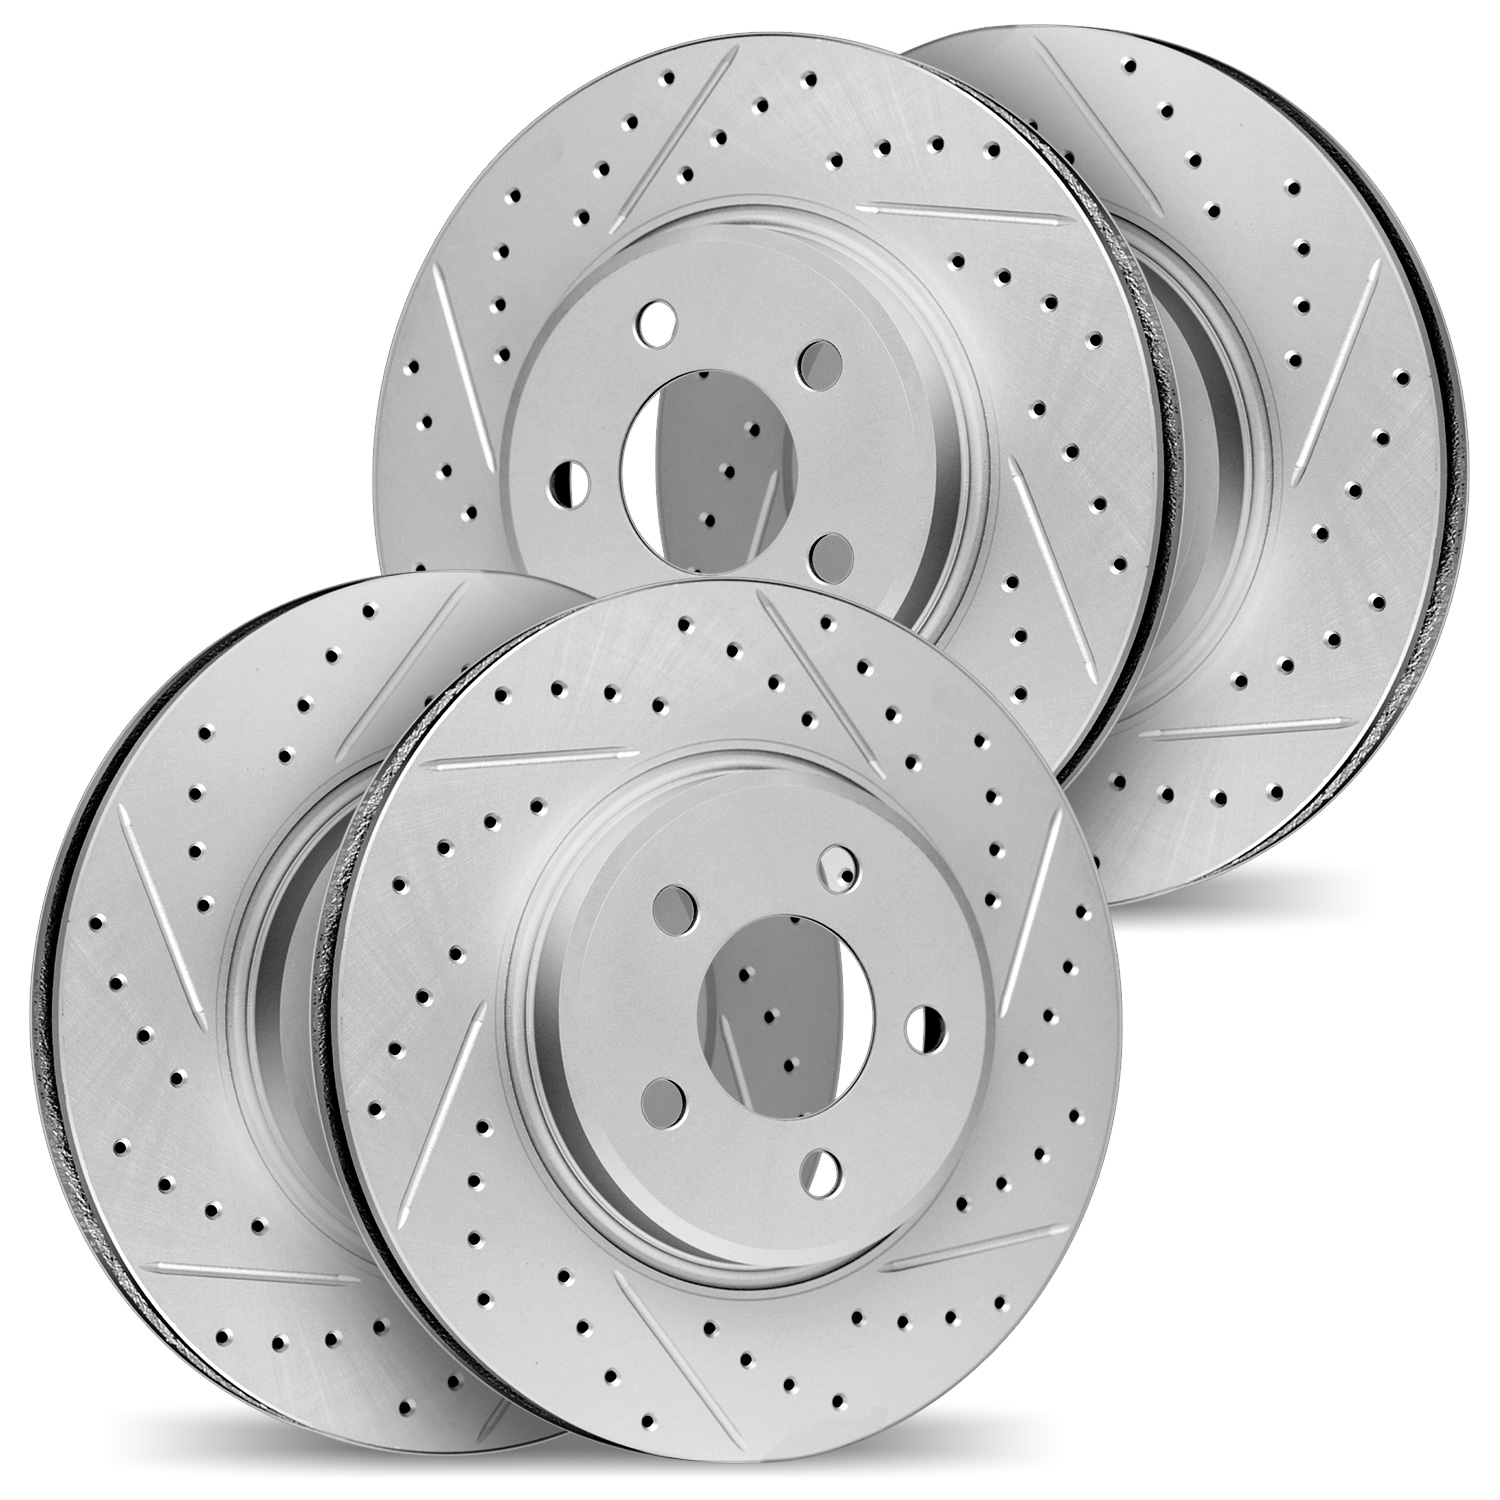 2004-31053 Geoperformance Drilled/Slotted Brake Rotors, 1995-2002 BMW, Position: Front and Rear